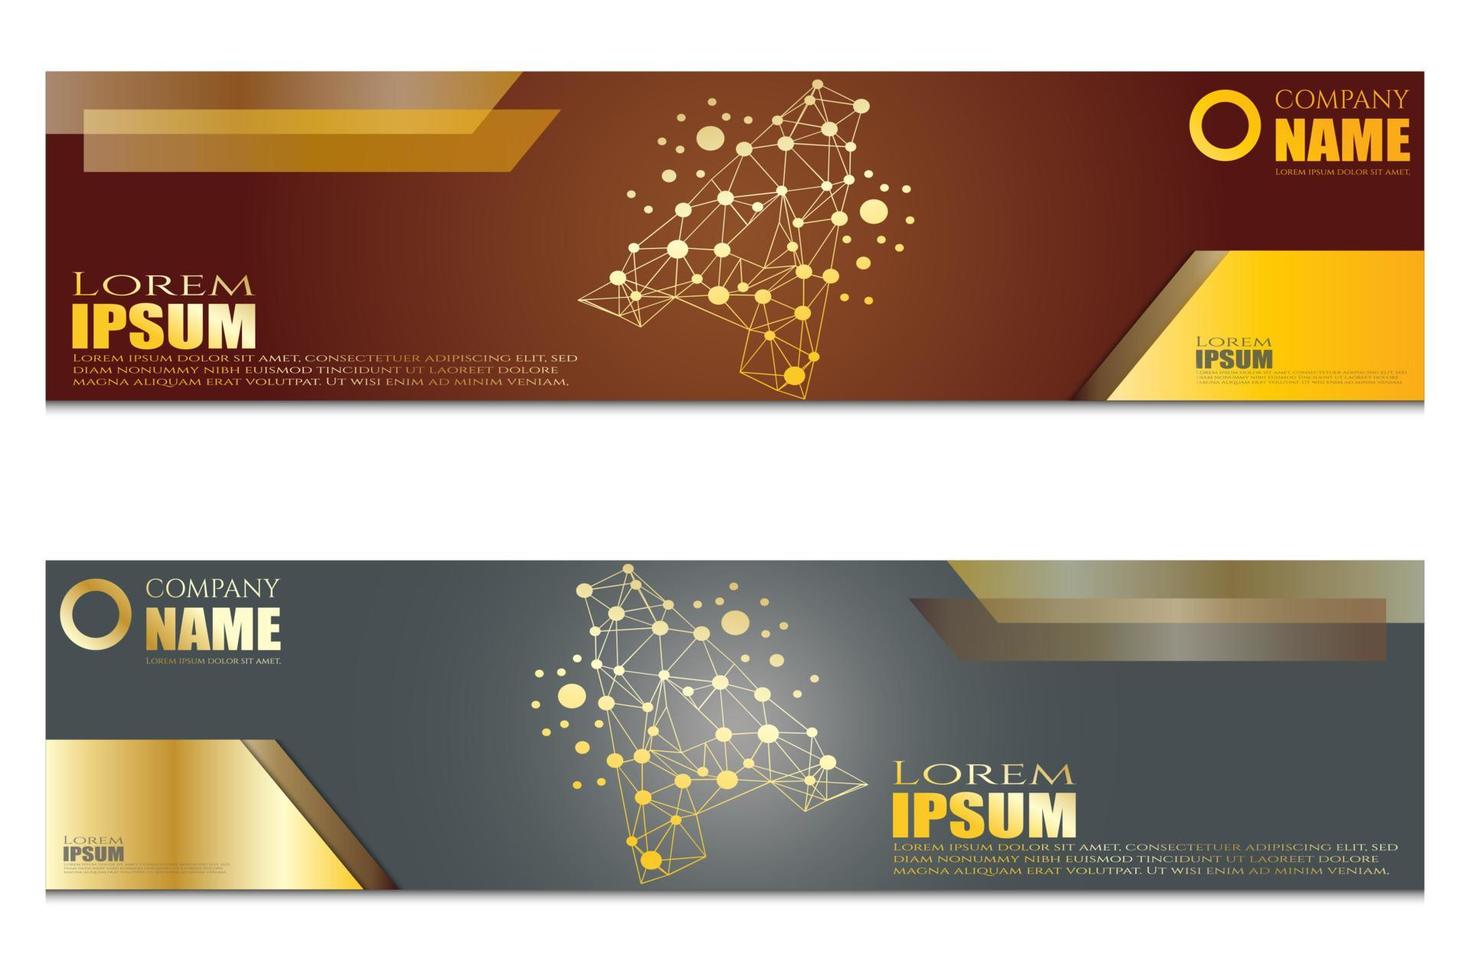 simple banner post template vector